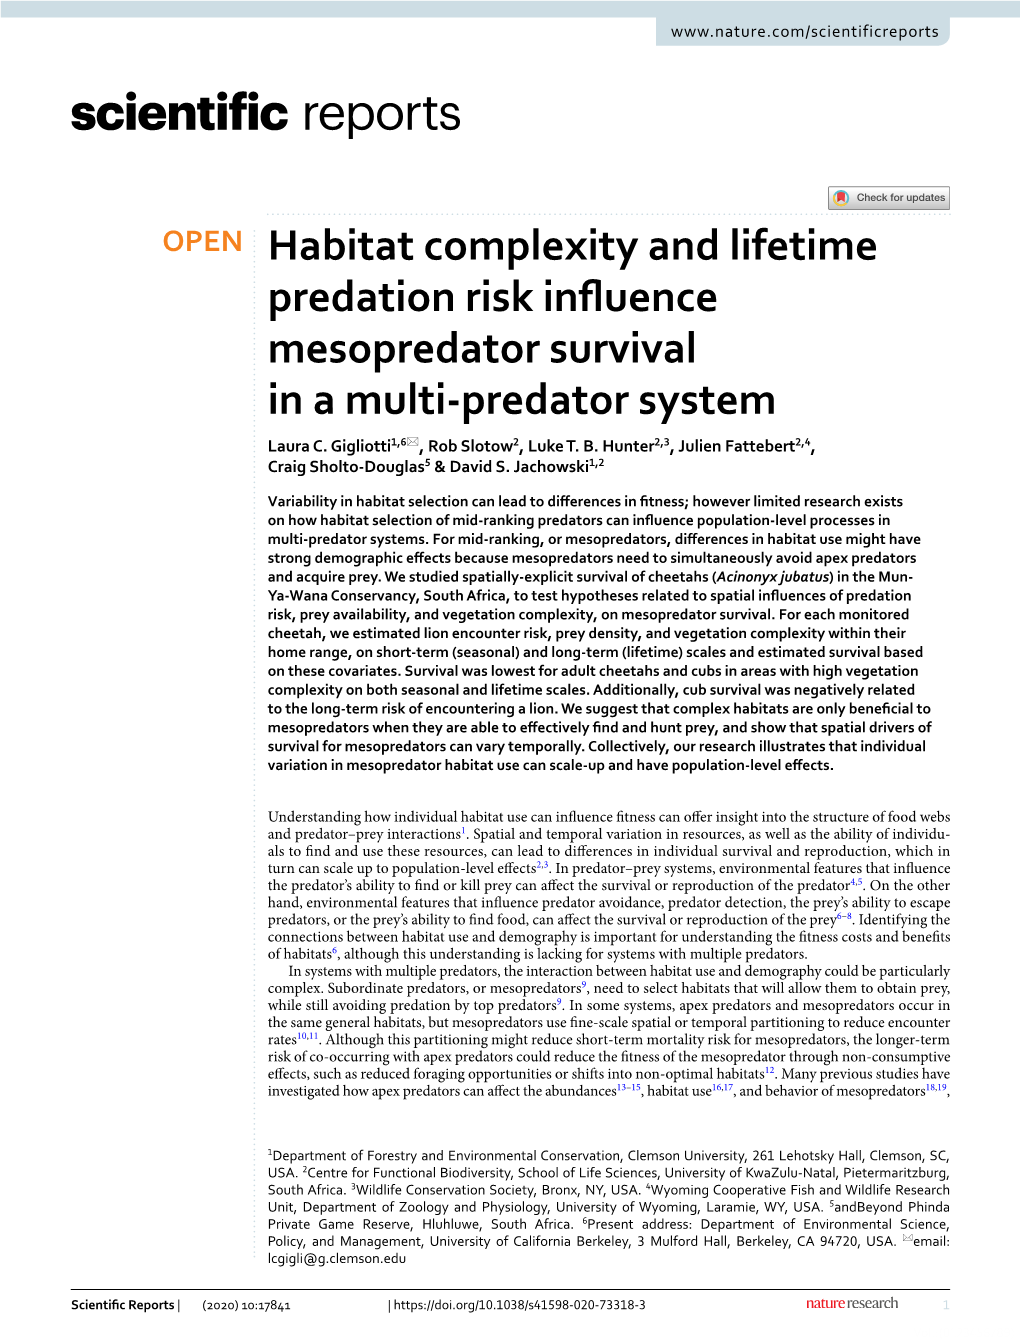 Habitat Complexity and Lifetime Predation Risk Influence